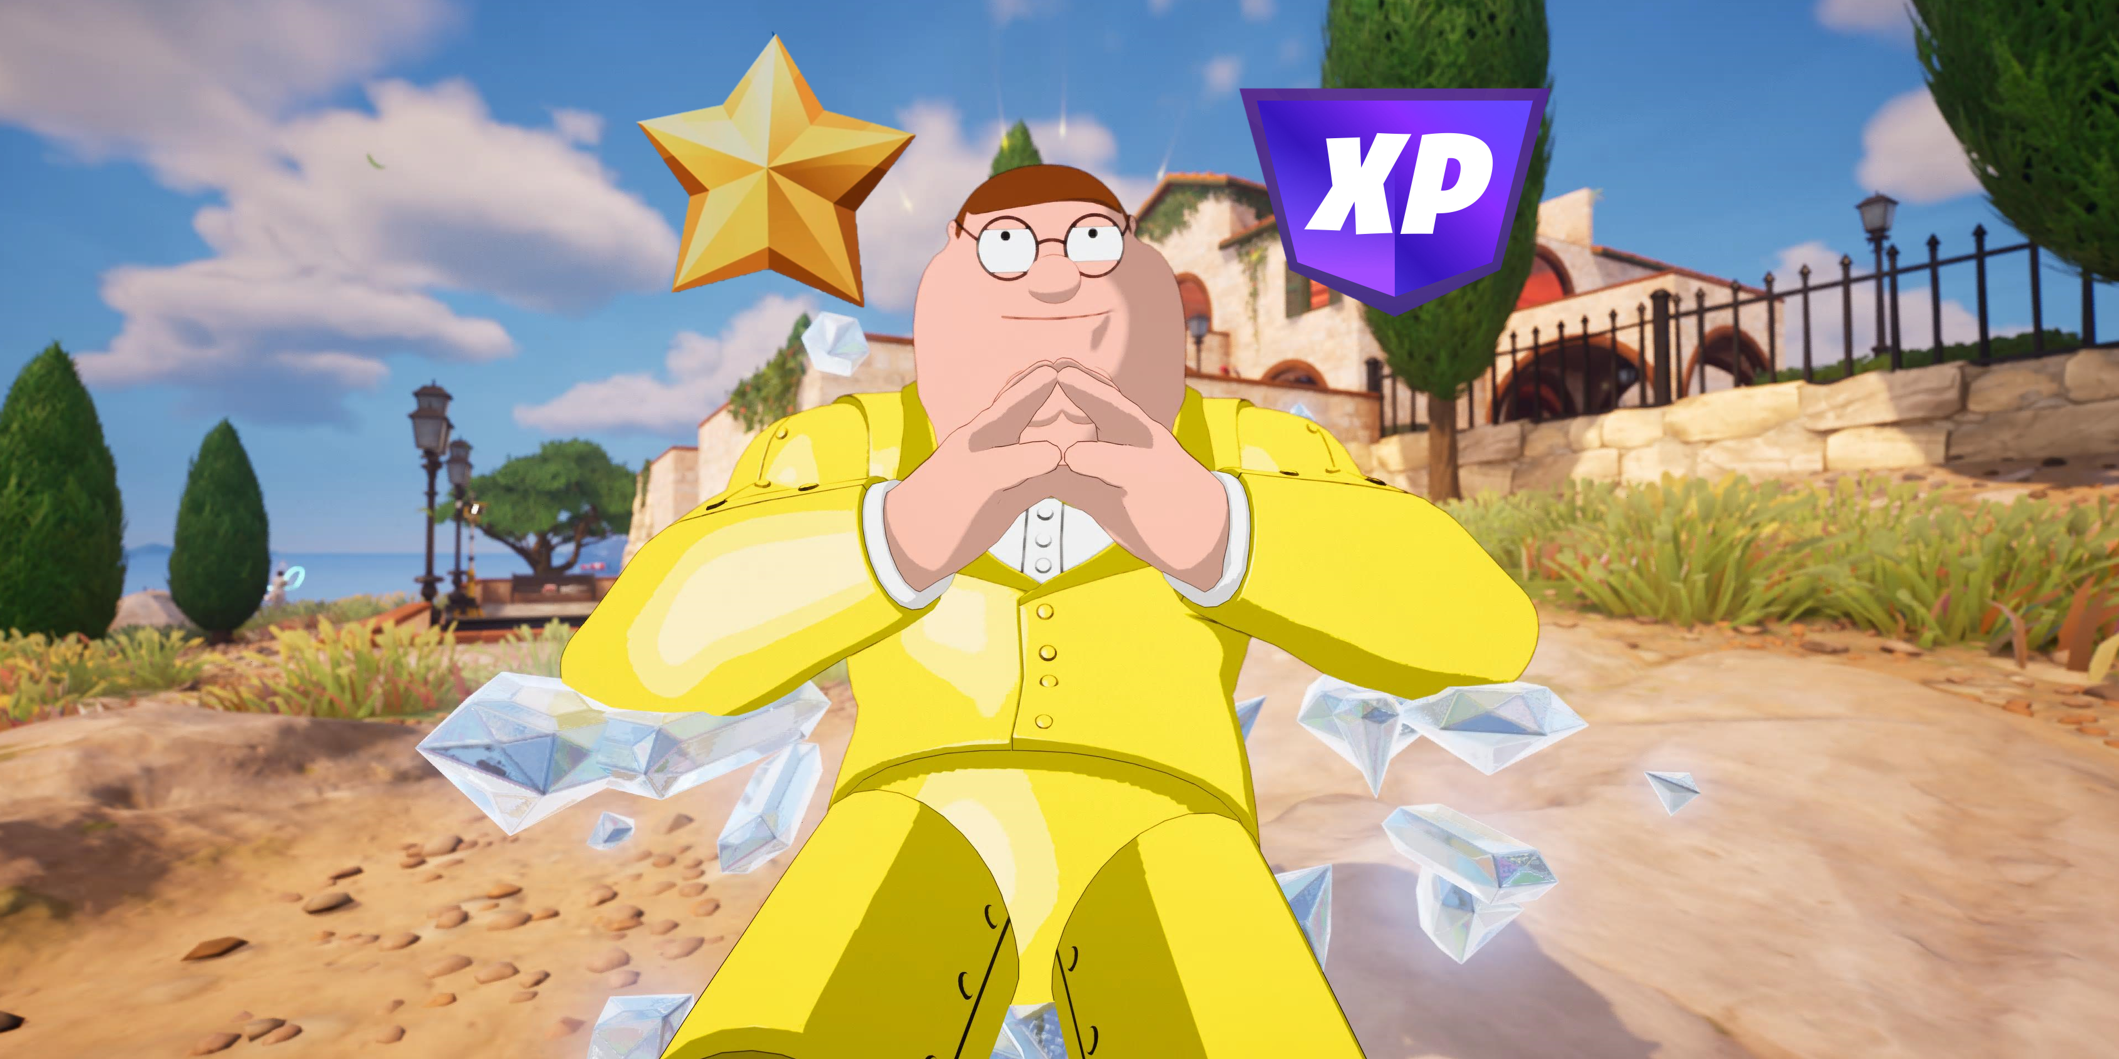 peter griffin gold metal suit in fortnite with xp and battle stars